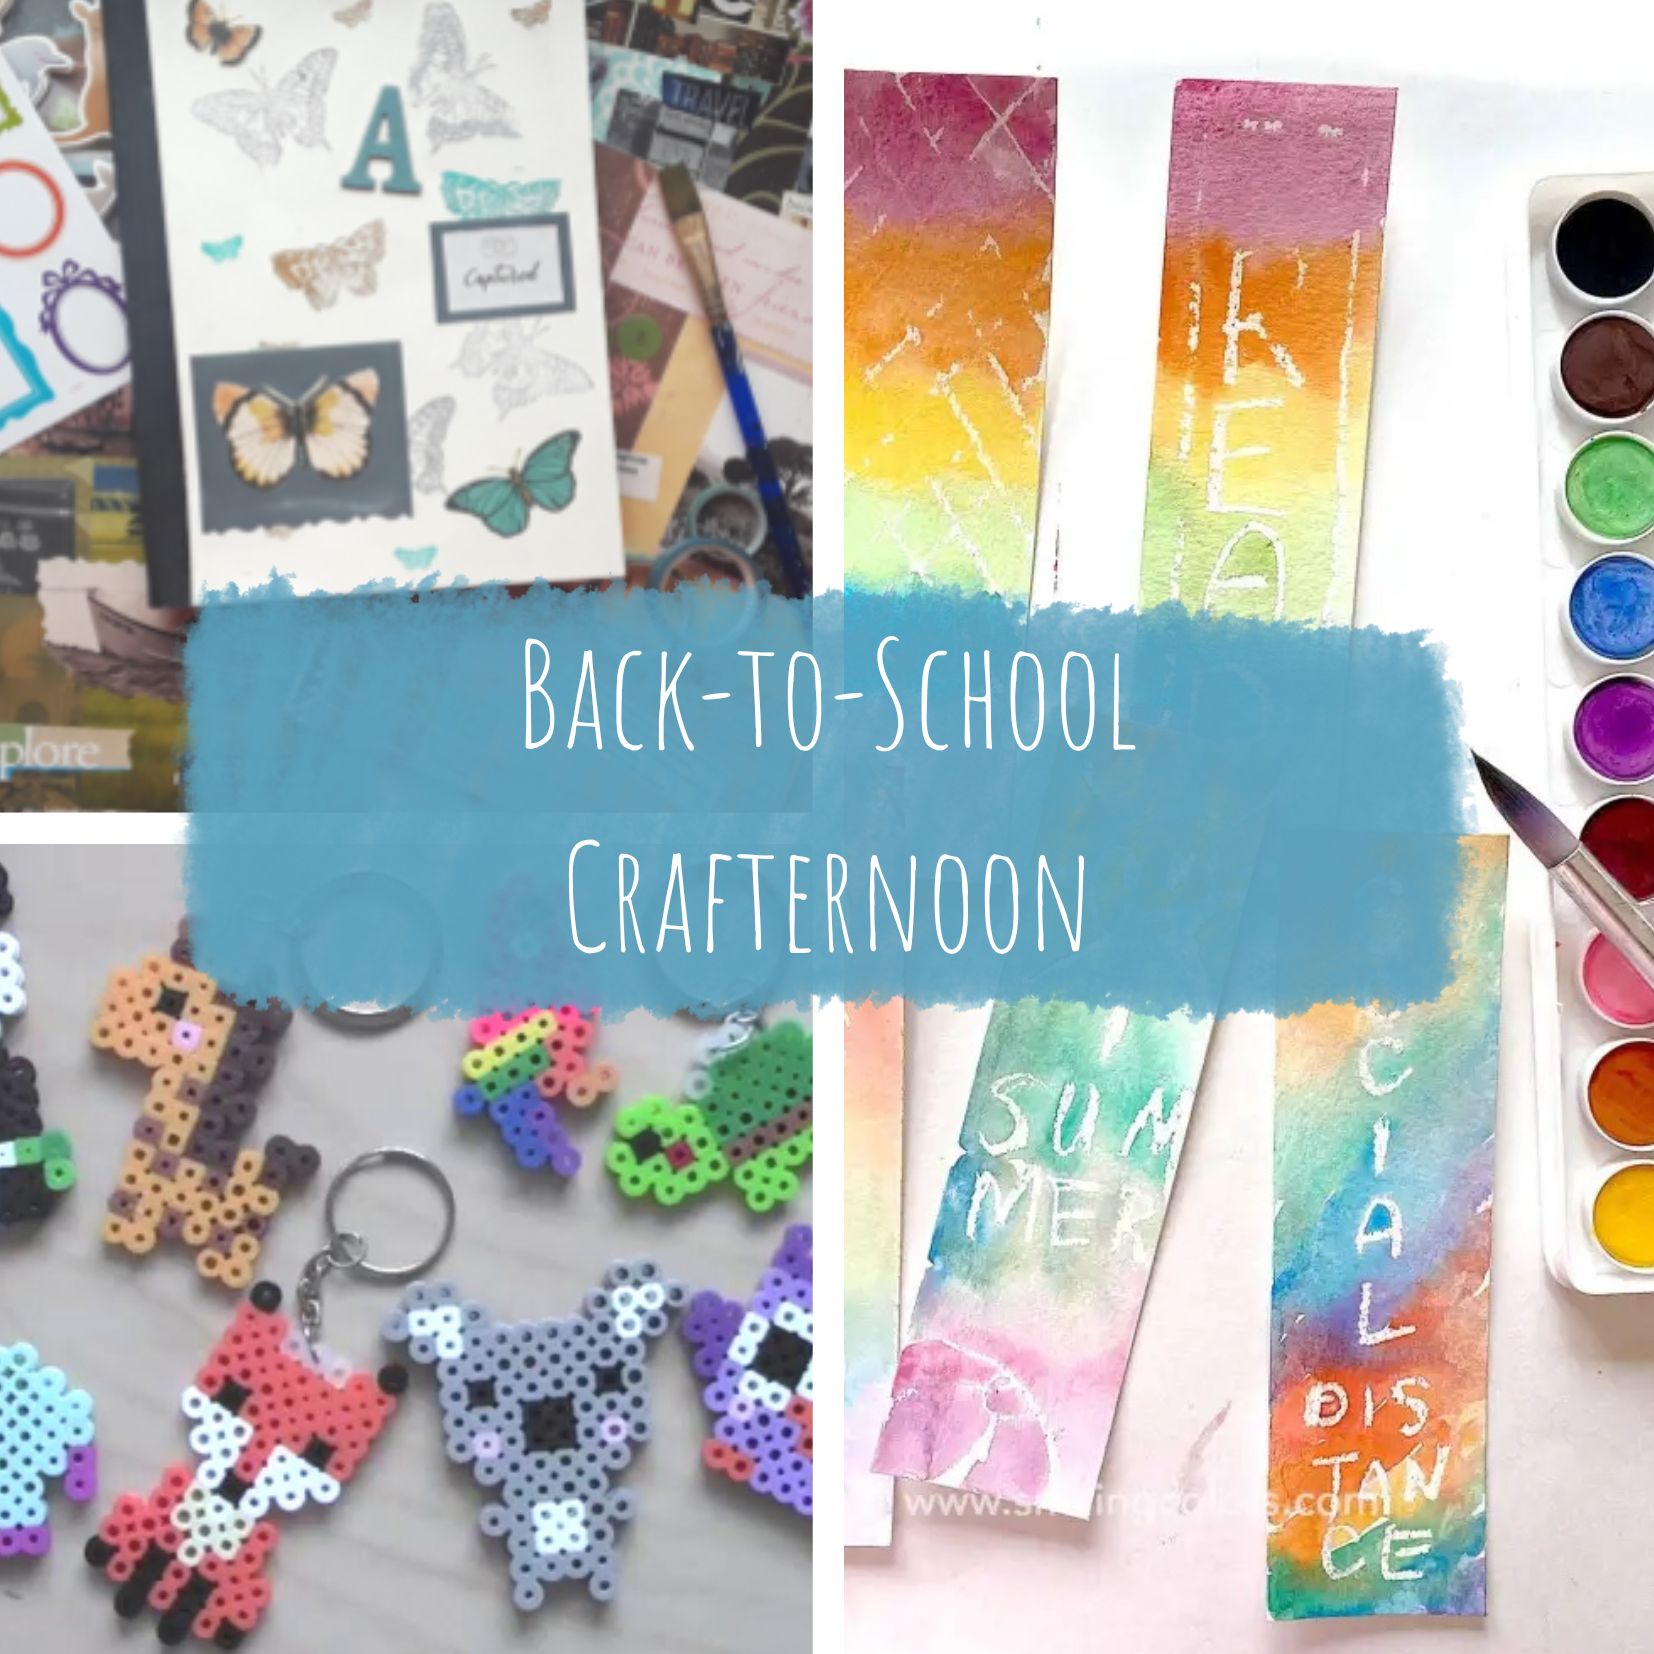 kids back to school crafternoon at mosaic